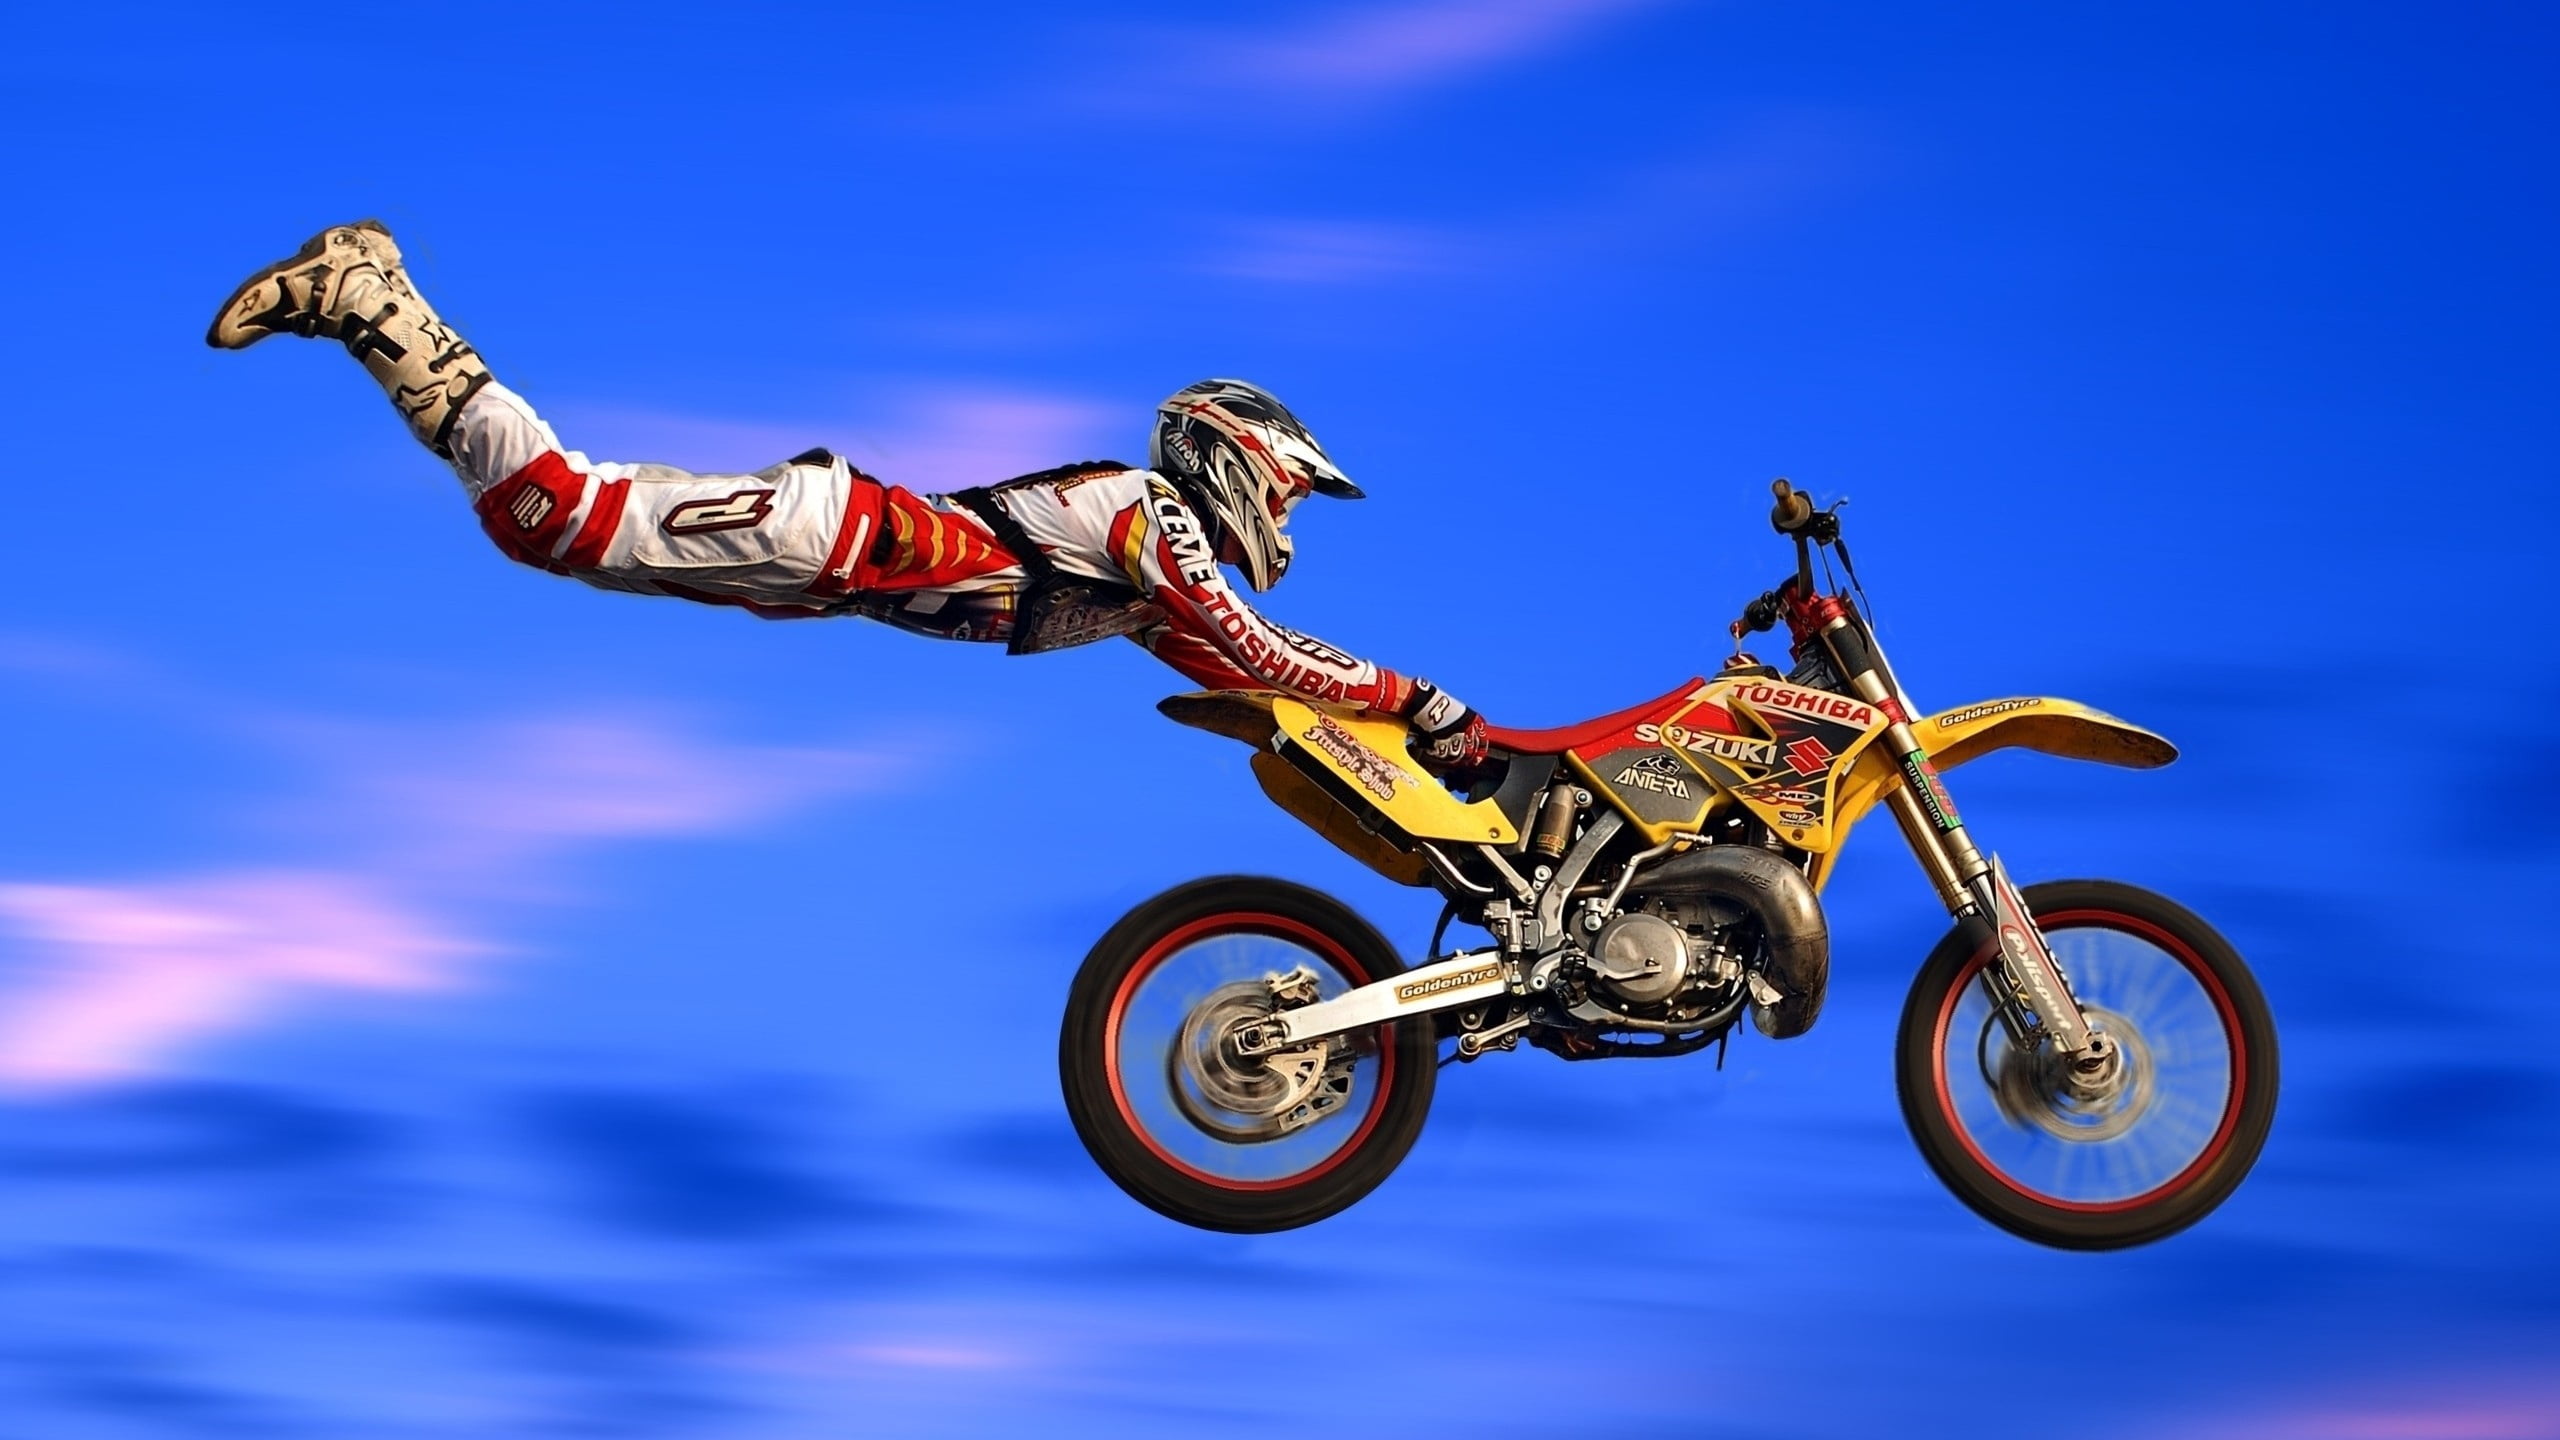 yellow, red, and black dirt bike, motorcycle, flight, trick, jump